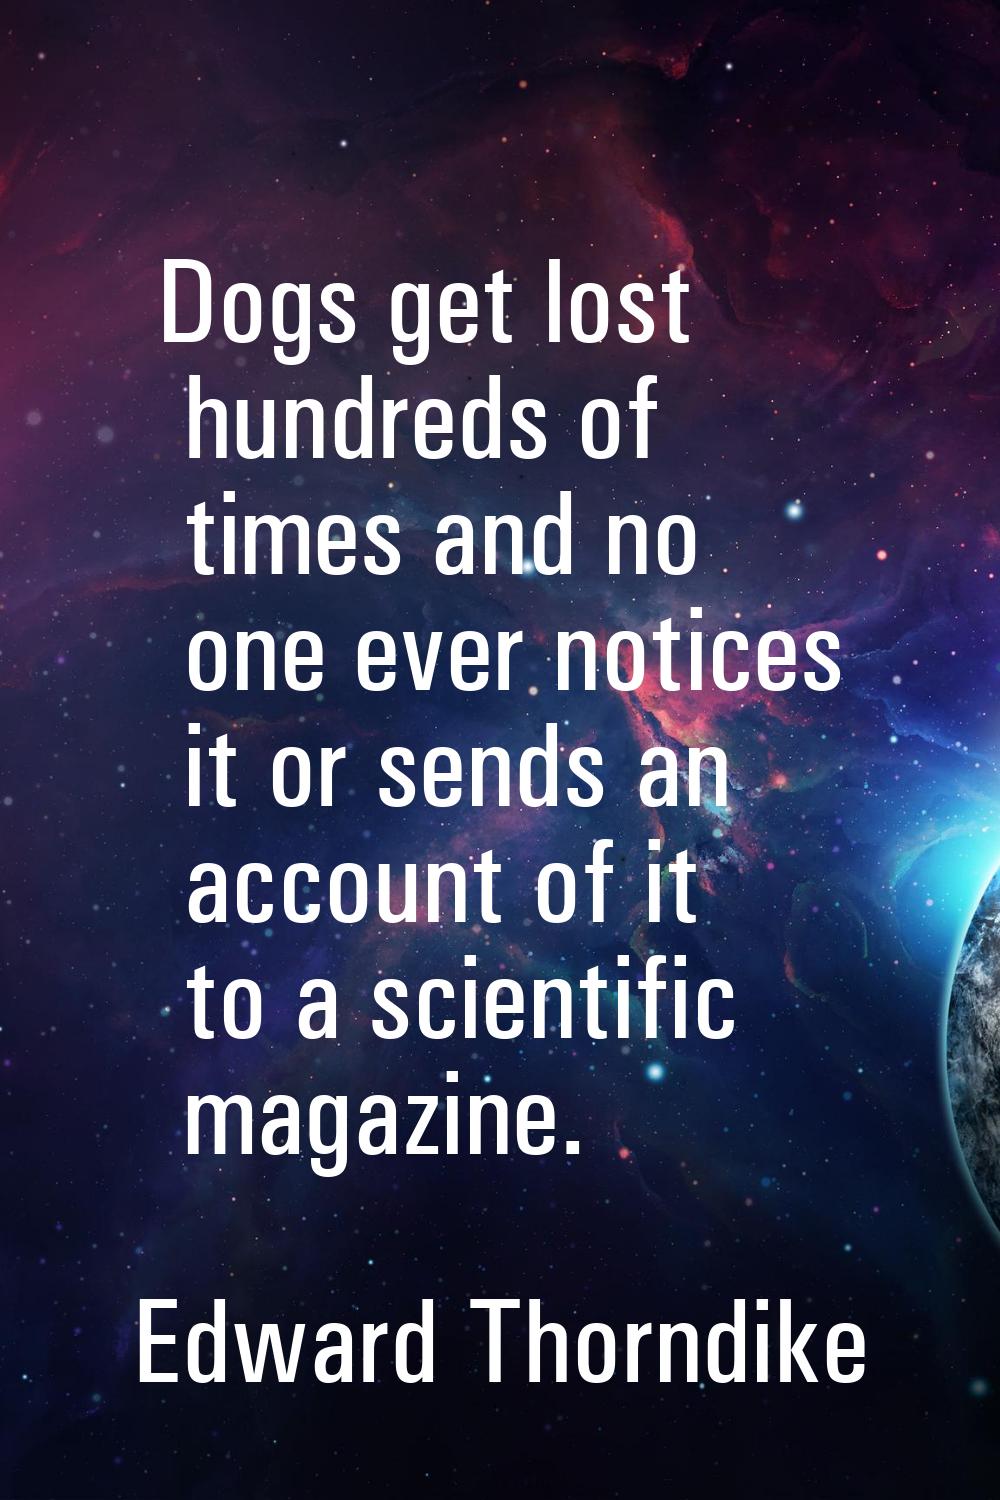 Dogs get lost hundreds of times and no one ever notices it or sends an account of it to a scientifi